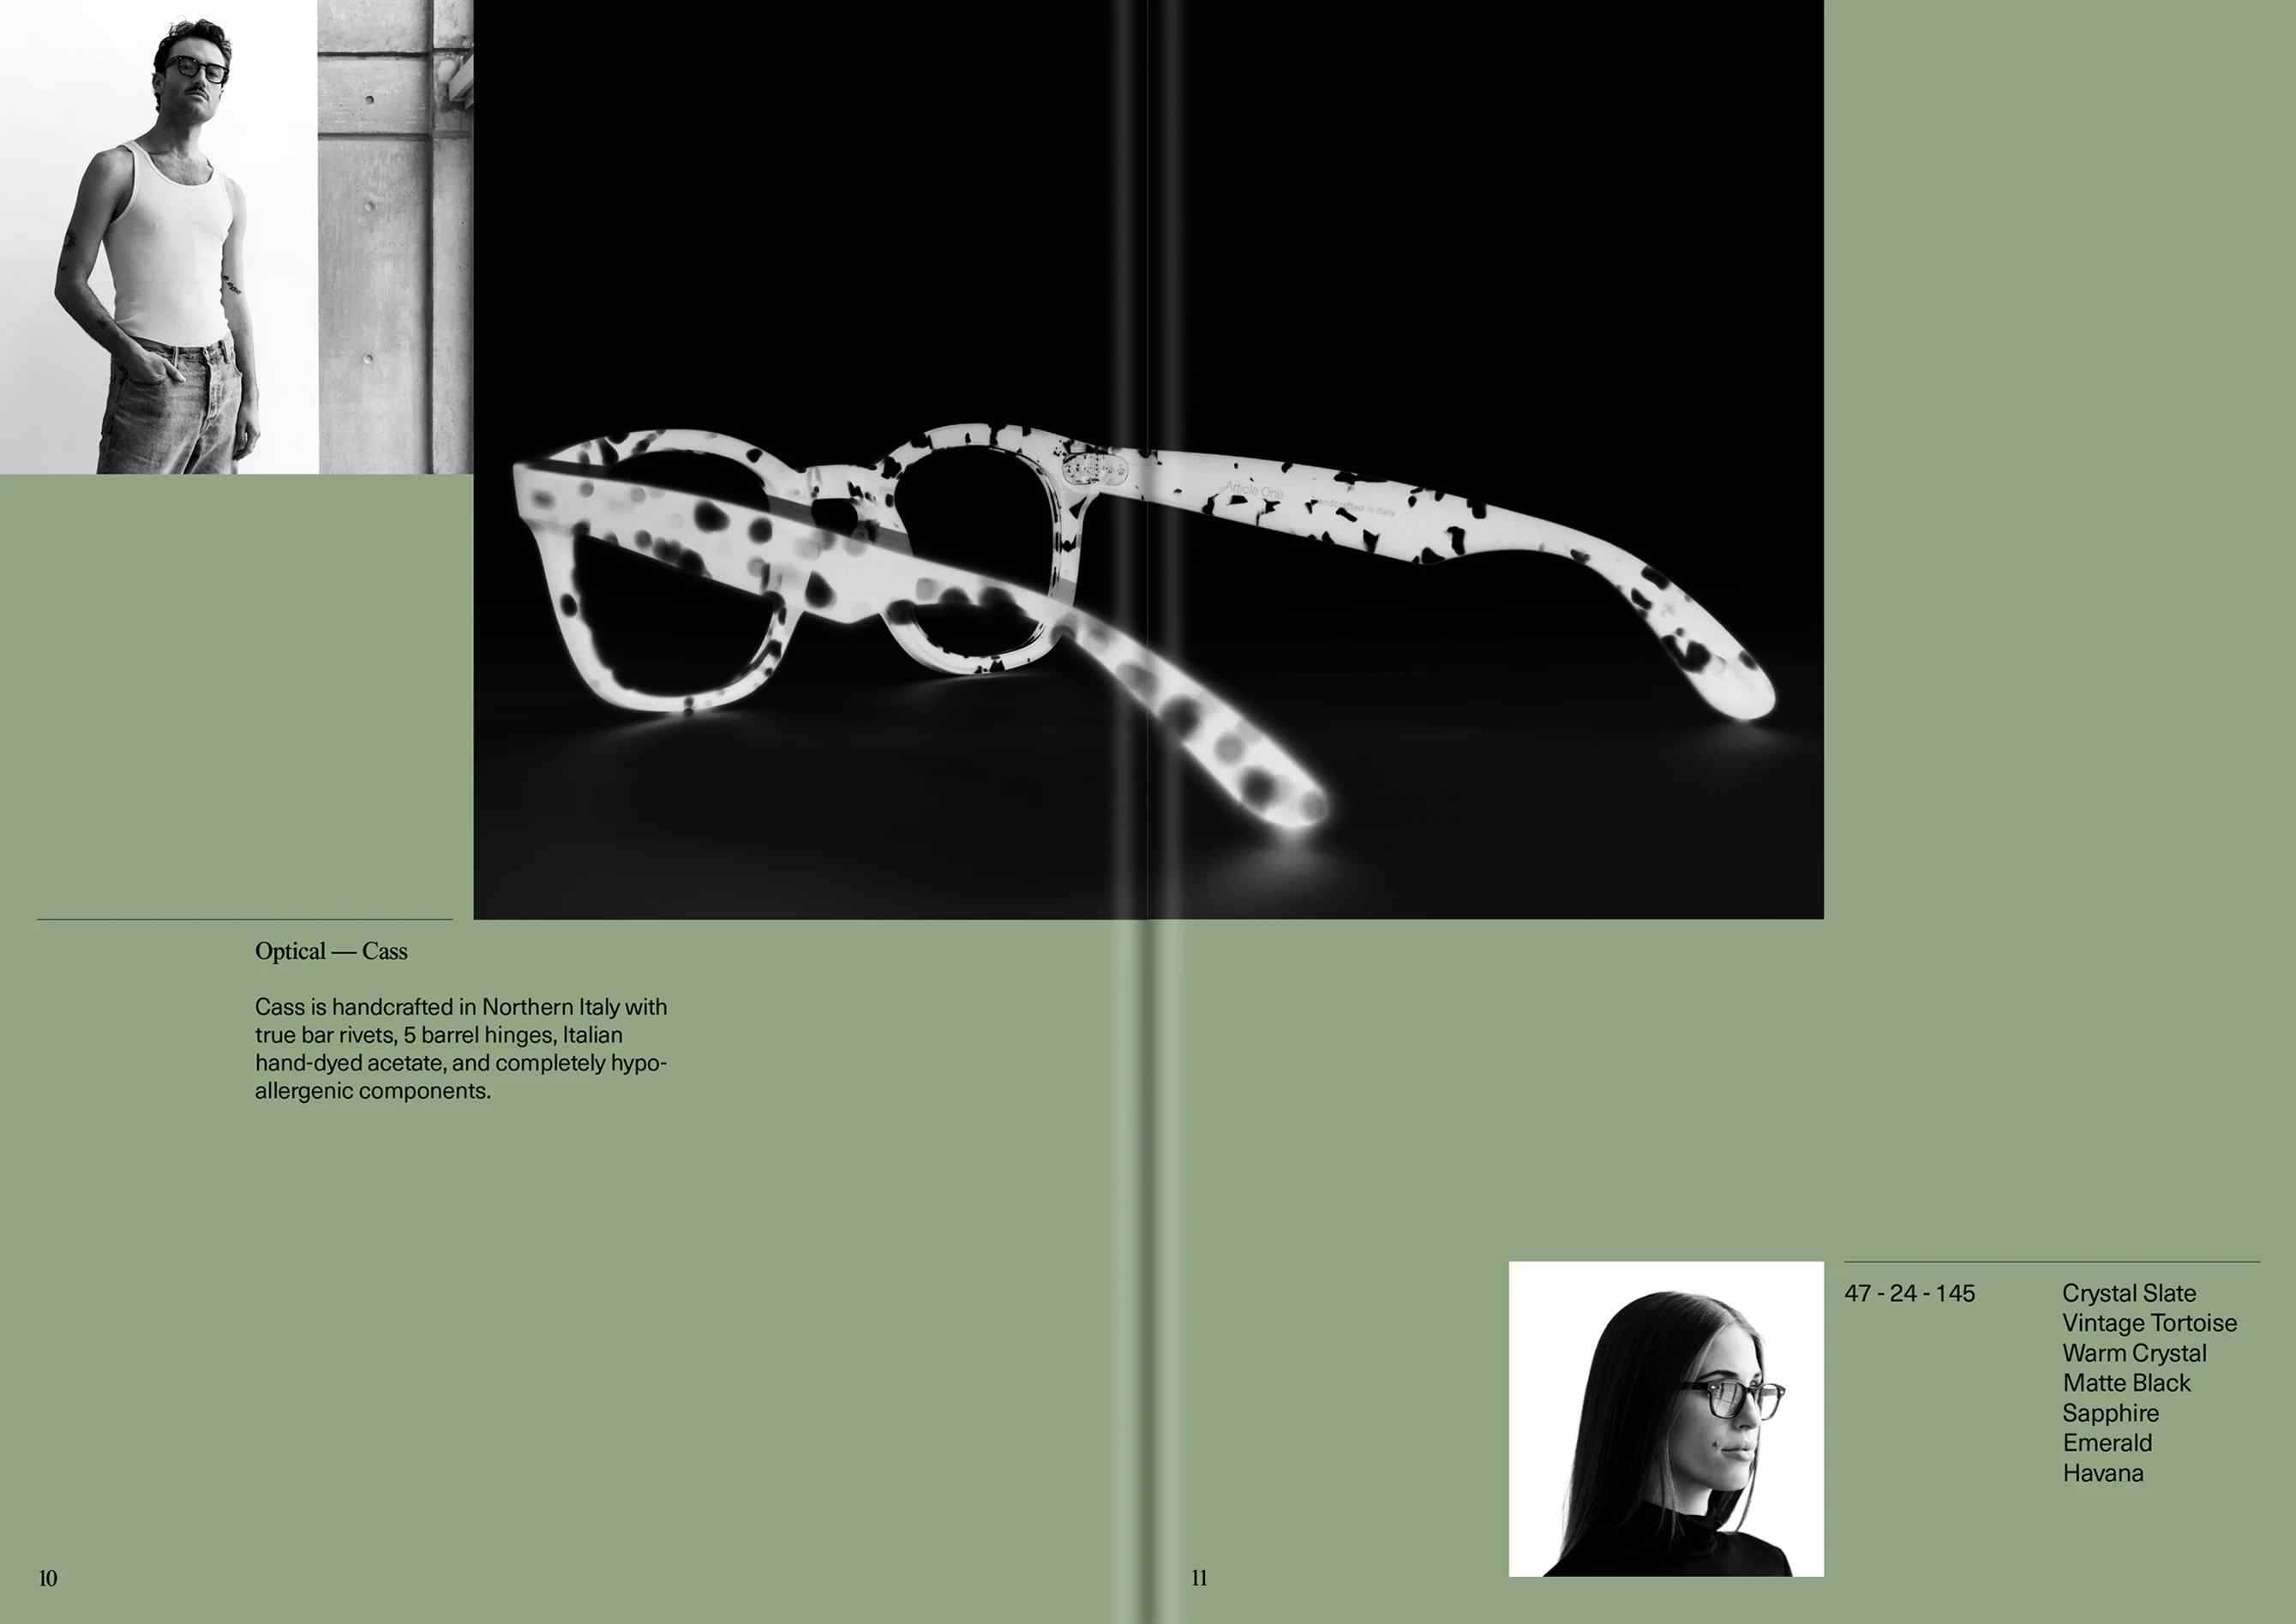 Article One Eyewear Art Direction, Imagery & Layout Design Editorial & Brand Collateral